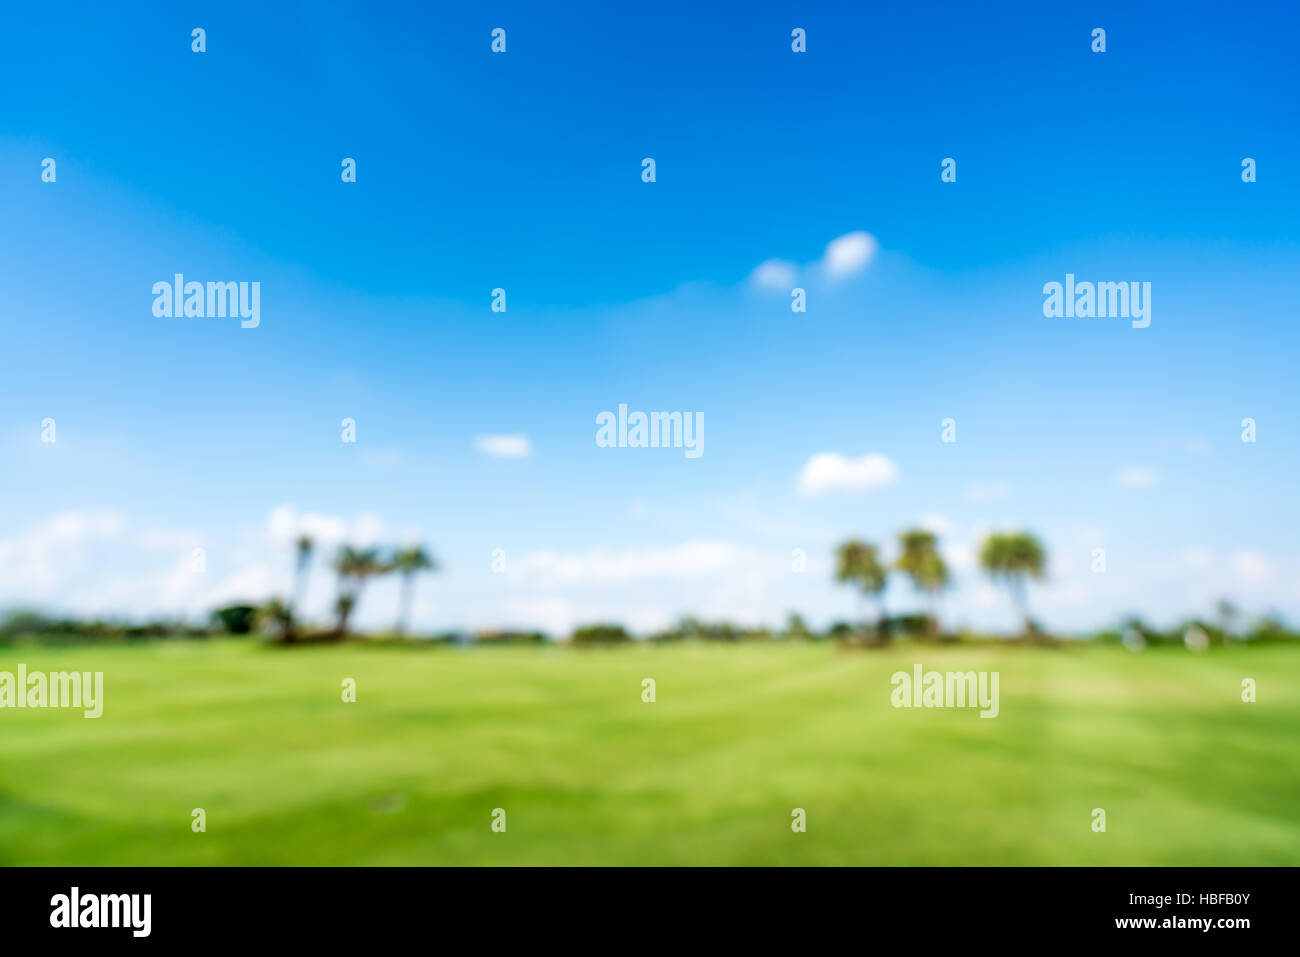 Golf course or green field blur background, copy space on blue sky, sport or nature concept Stock Photo